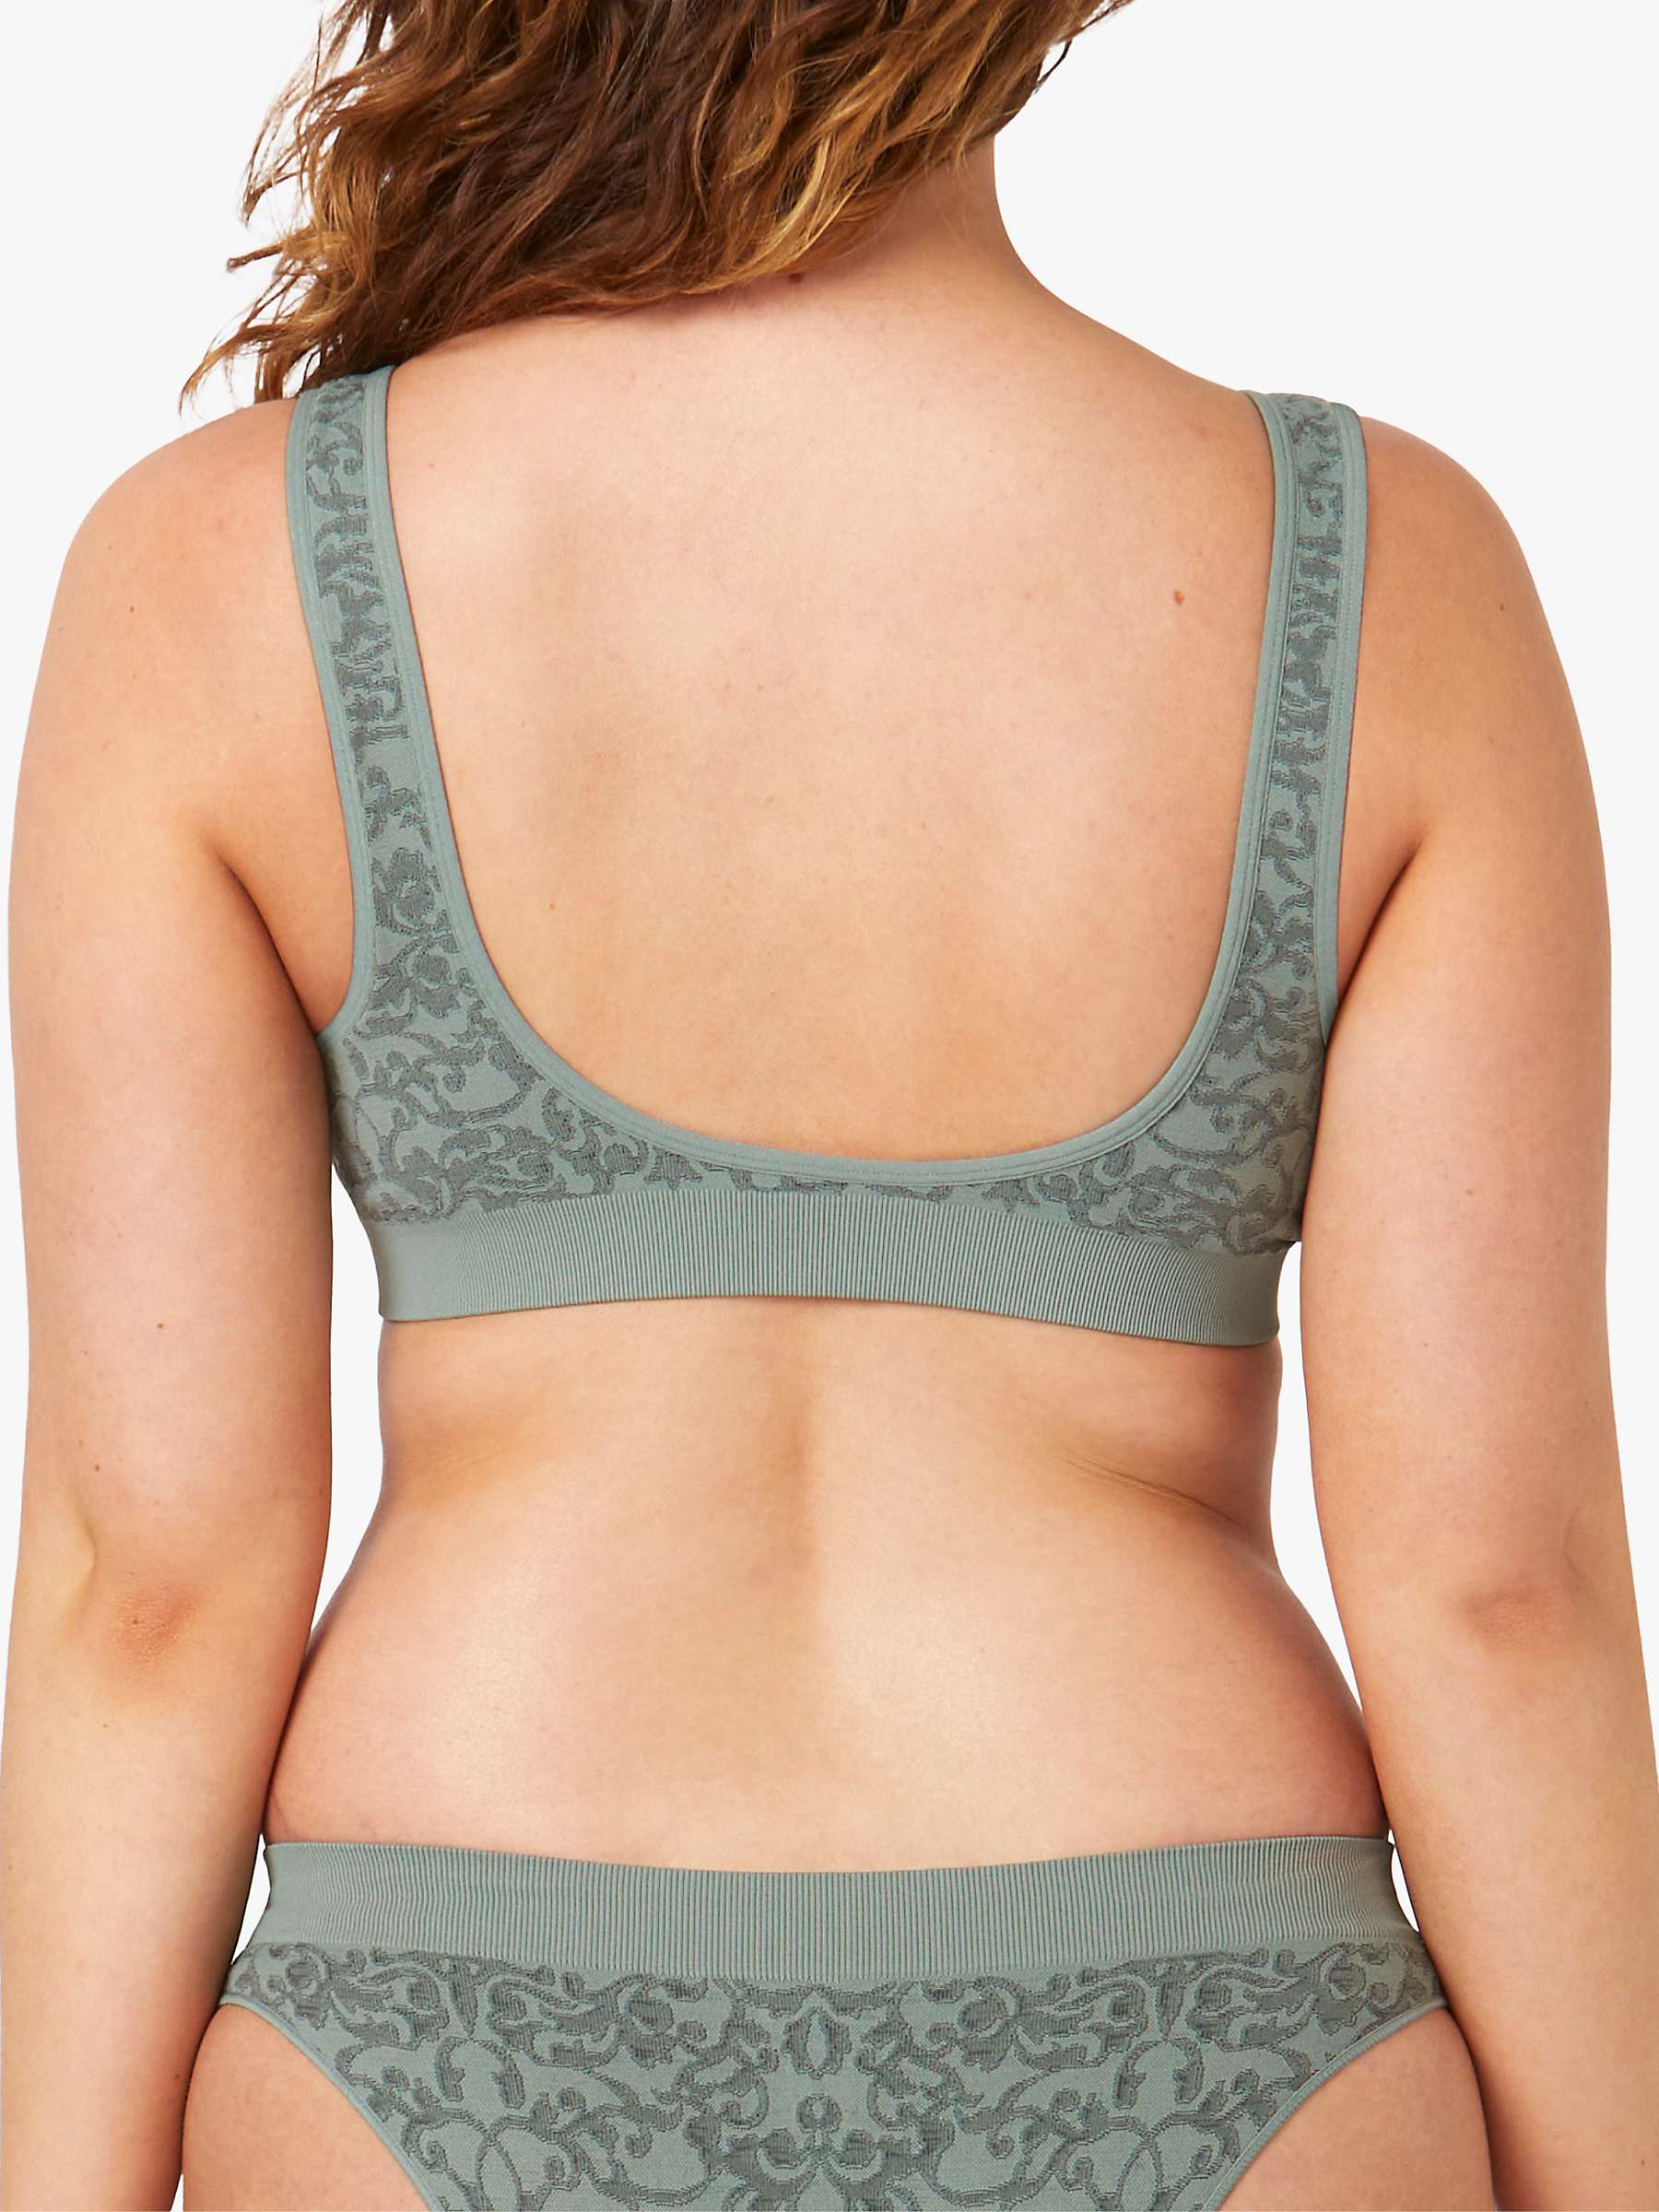 Buy Ambra Bare Essentials Lace Soft Cup Bra Online at johnlewis.com